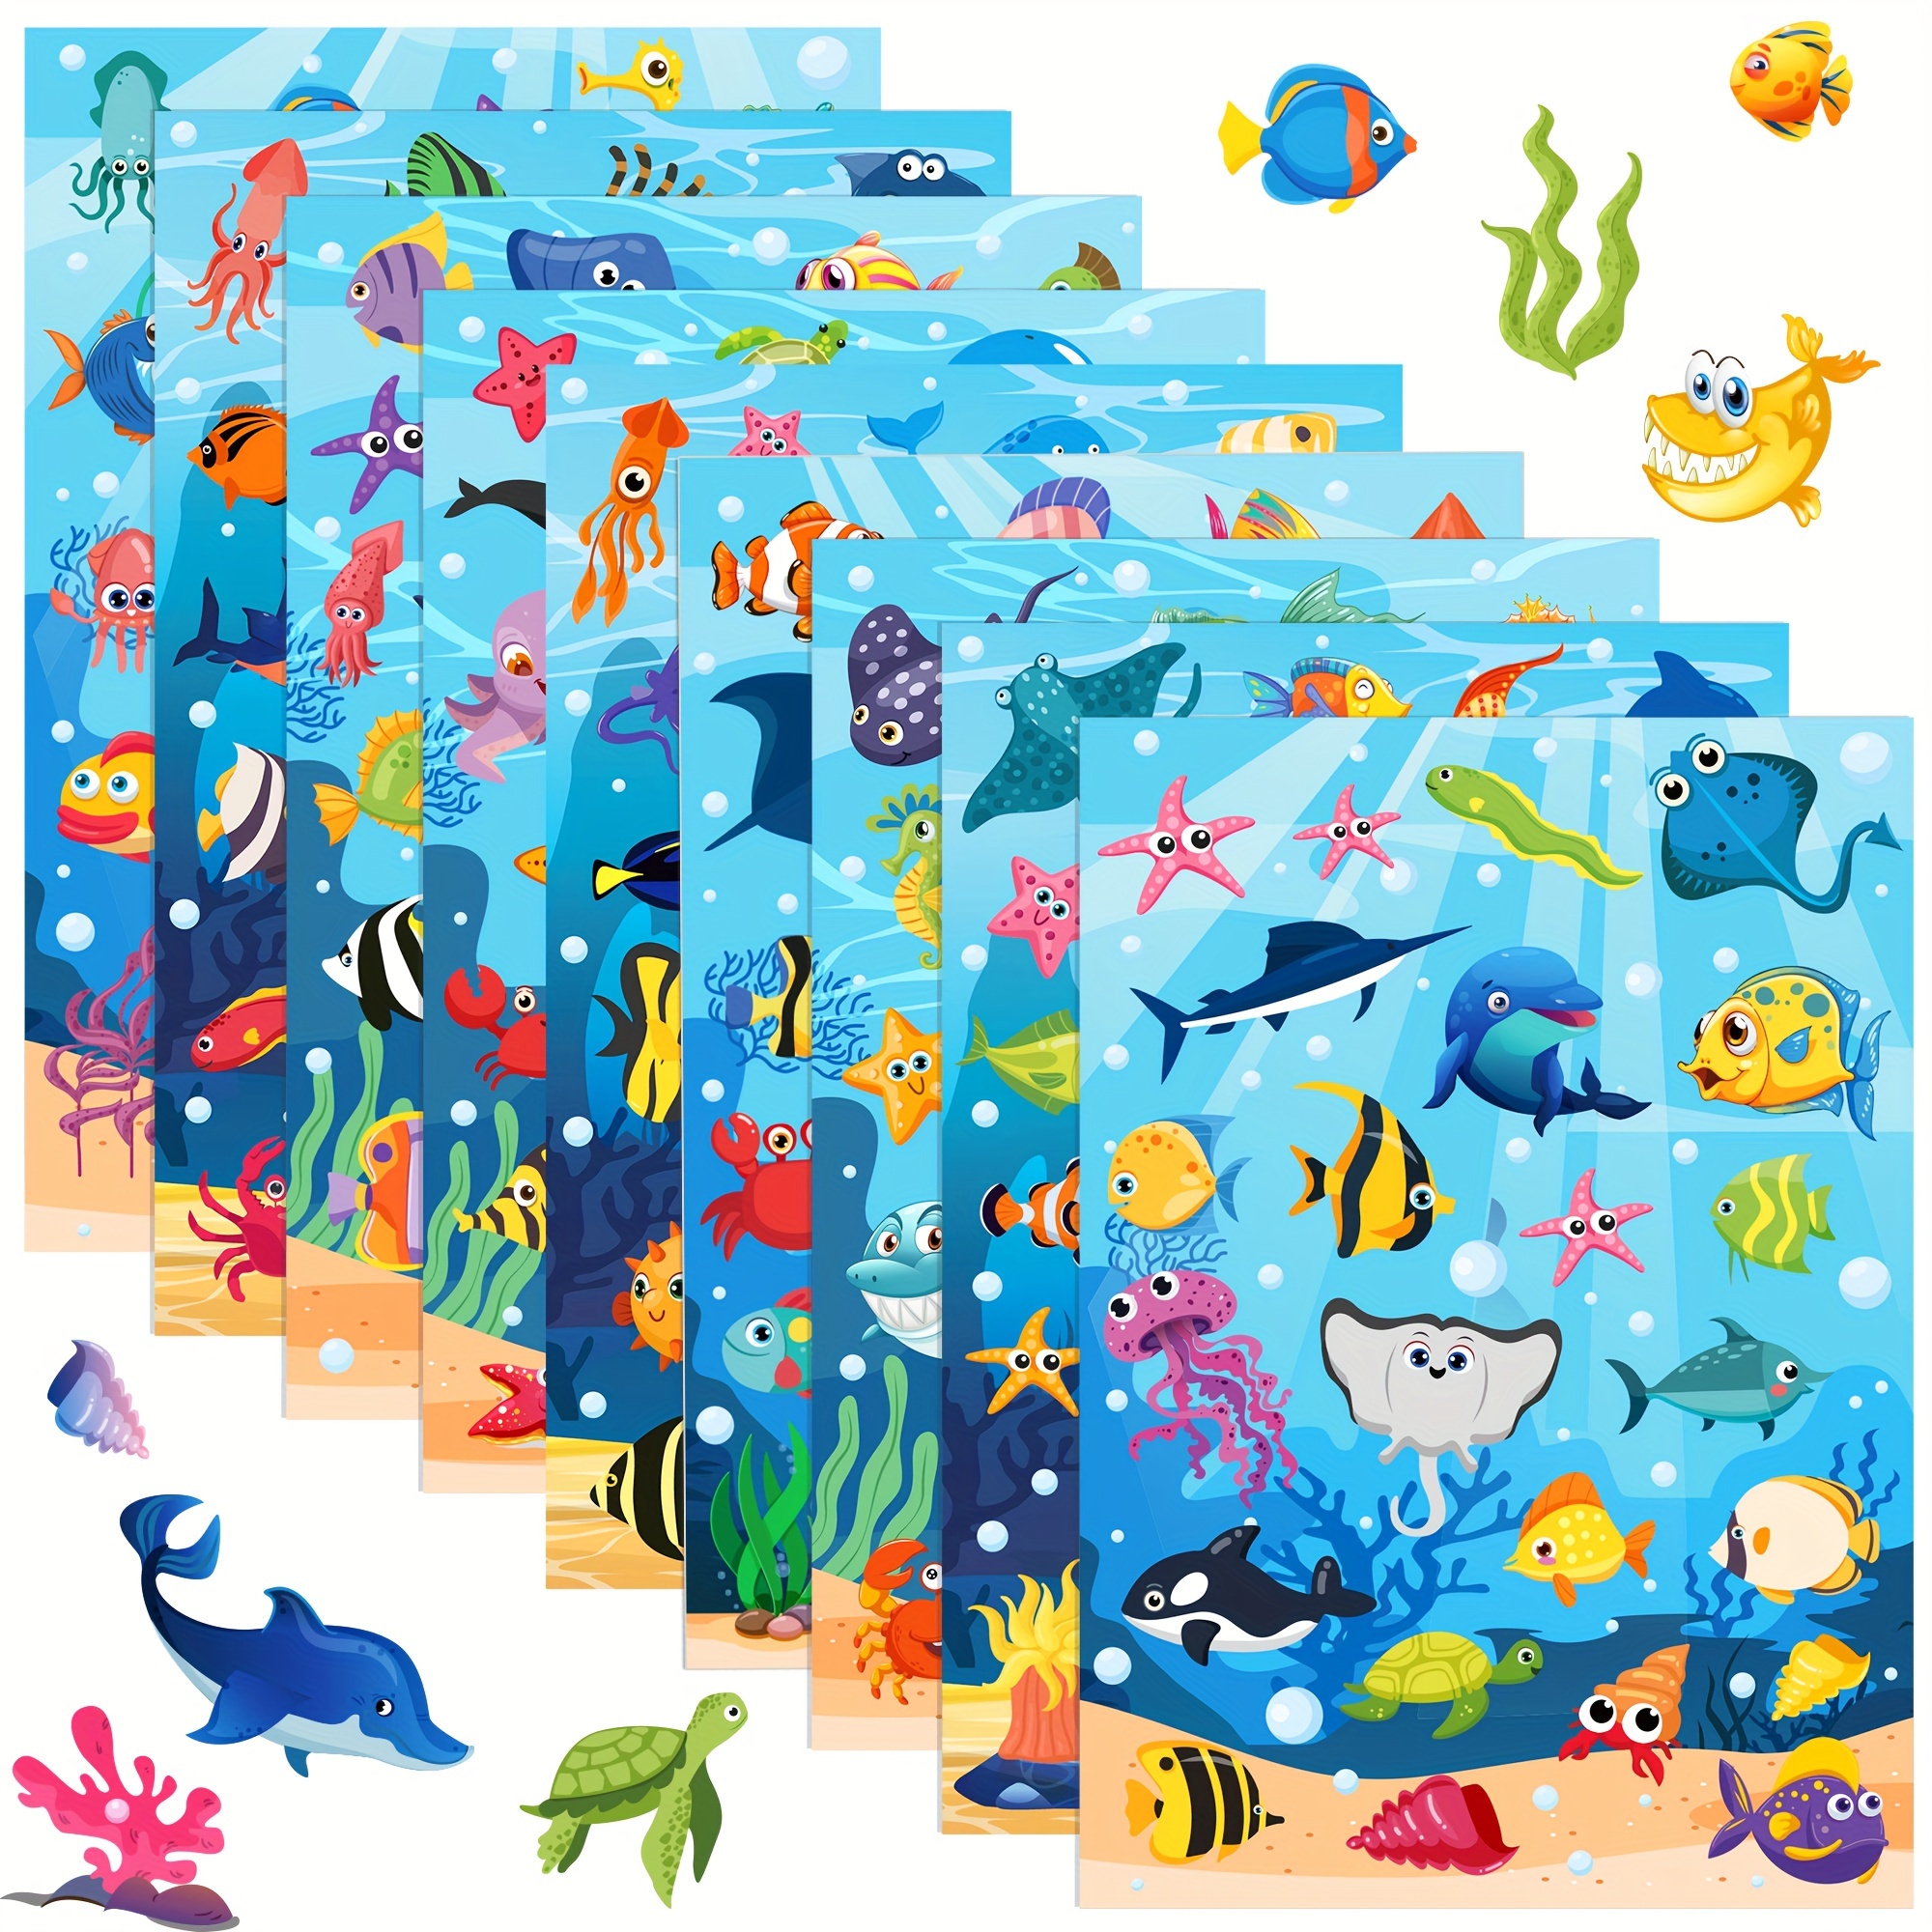 Stickers Glitter Pack 10 Sheets Tropical Fish Sea Animals Cartoon Decal  Stickers Craft DIY Decoration Scrapbook Book Album Diary Card Birthday  Party